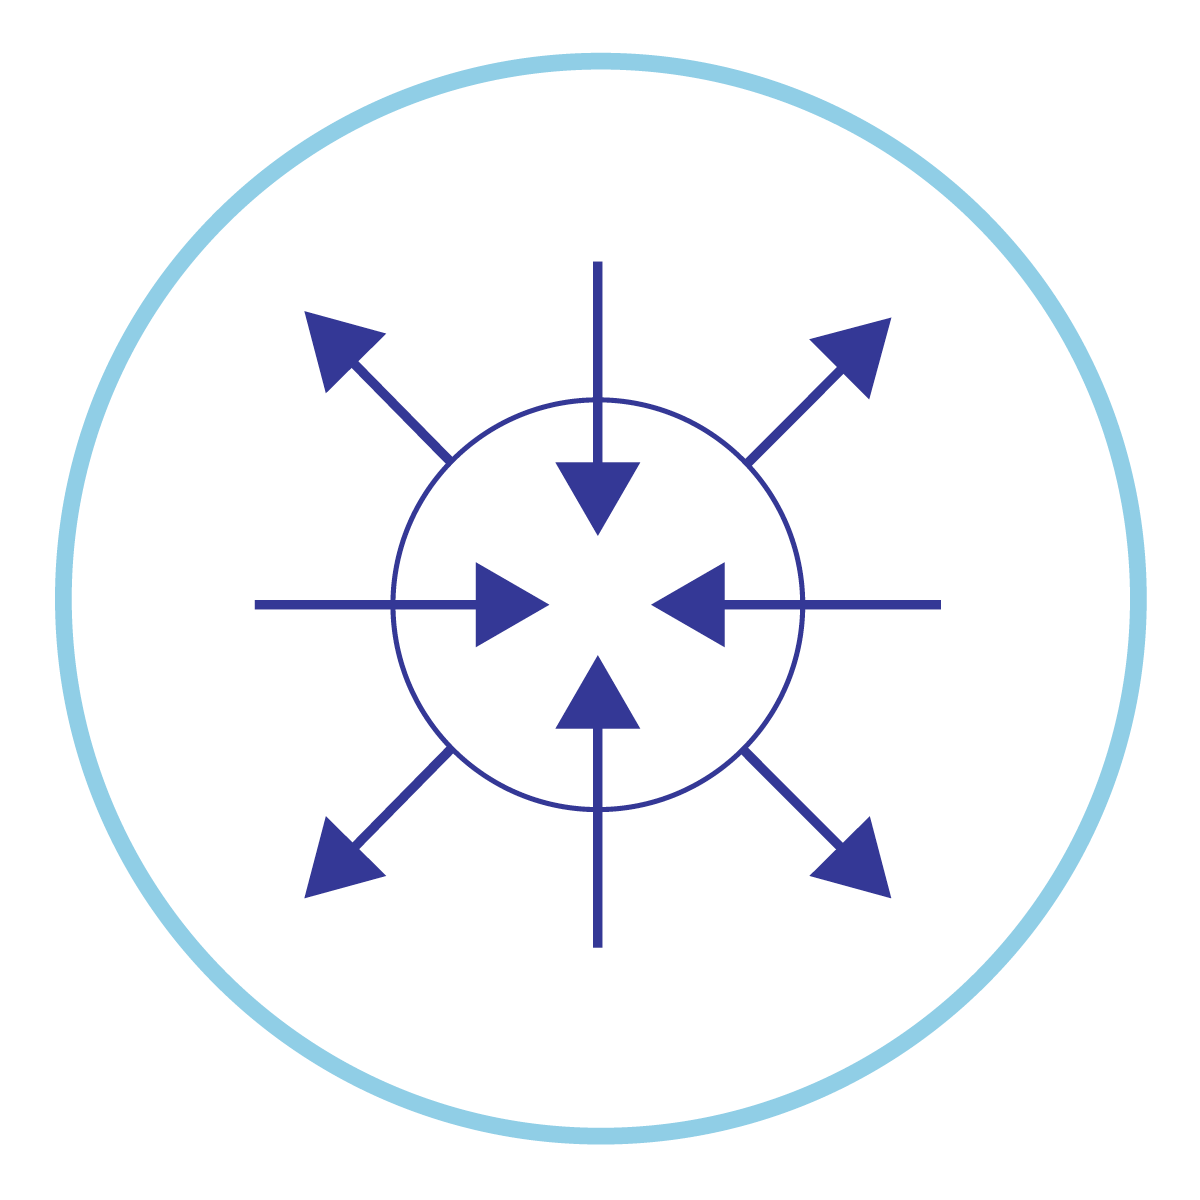 4 arrows pointing to the center of a circle and 4 arrows pointing away from the same circle icon 